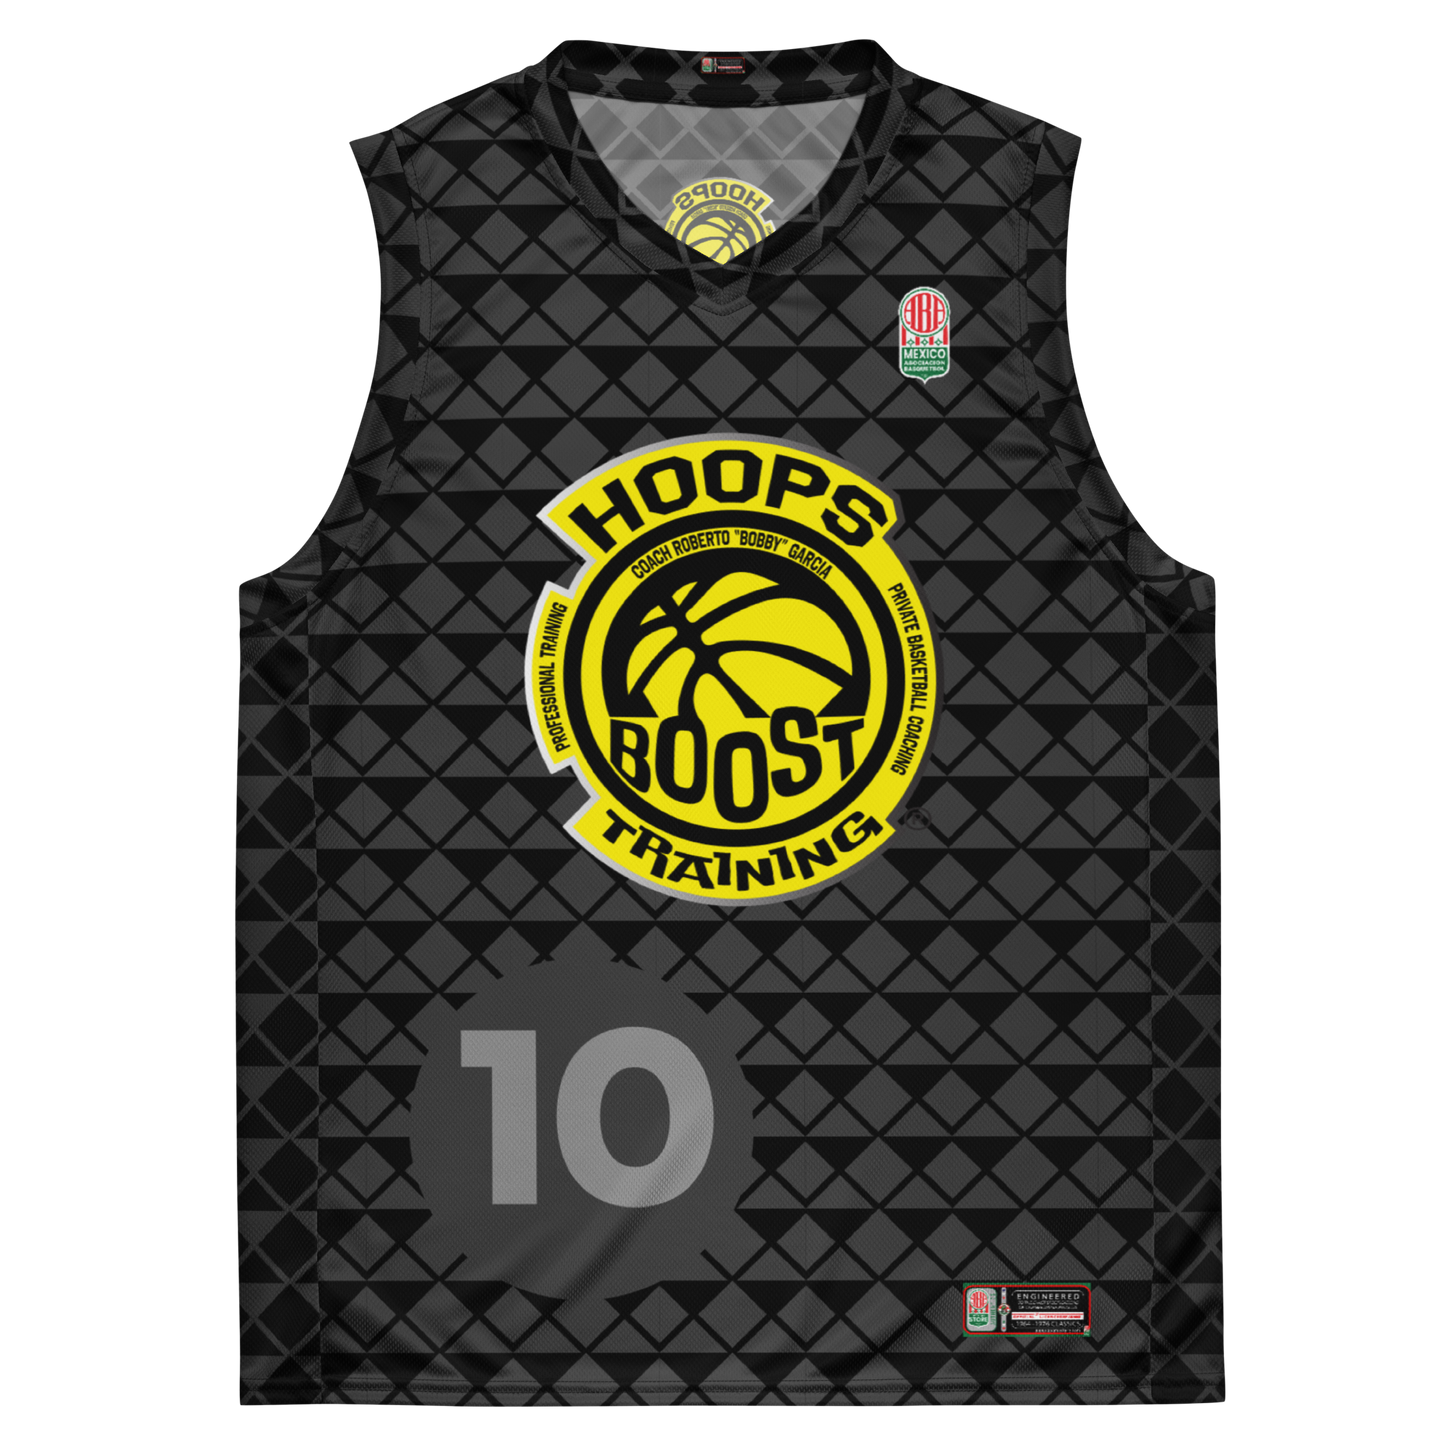 HOOPS BOOST TRAINING - WORK OUT JERSEY